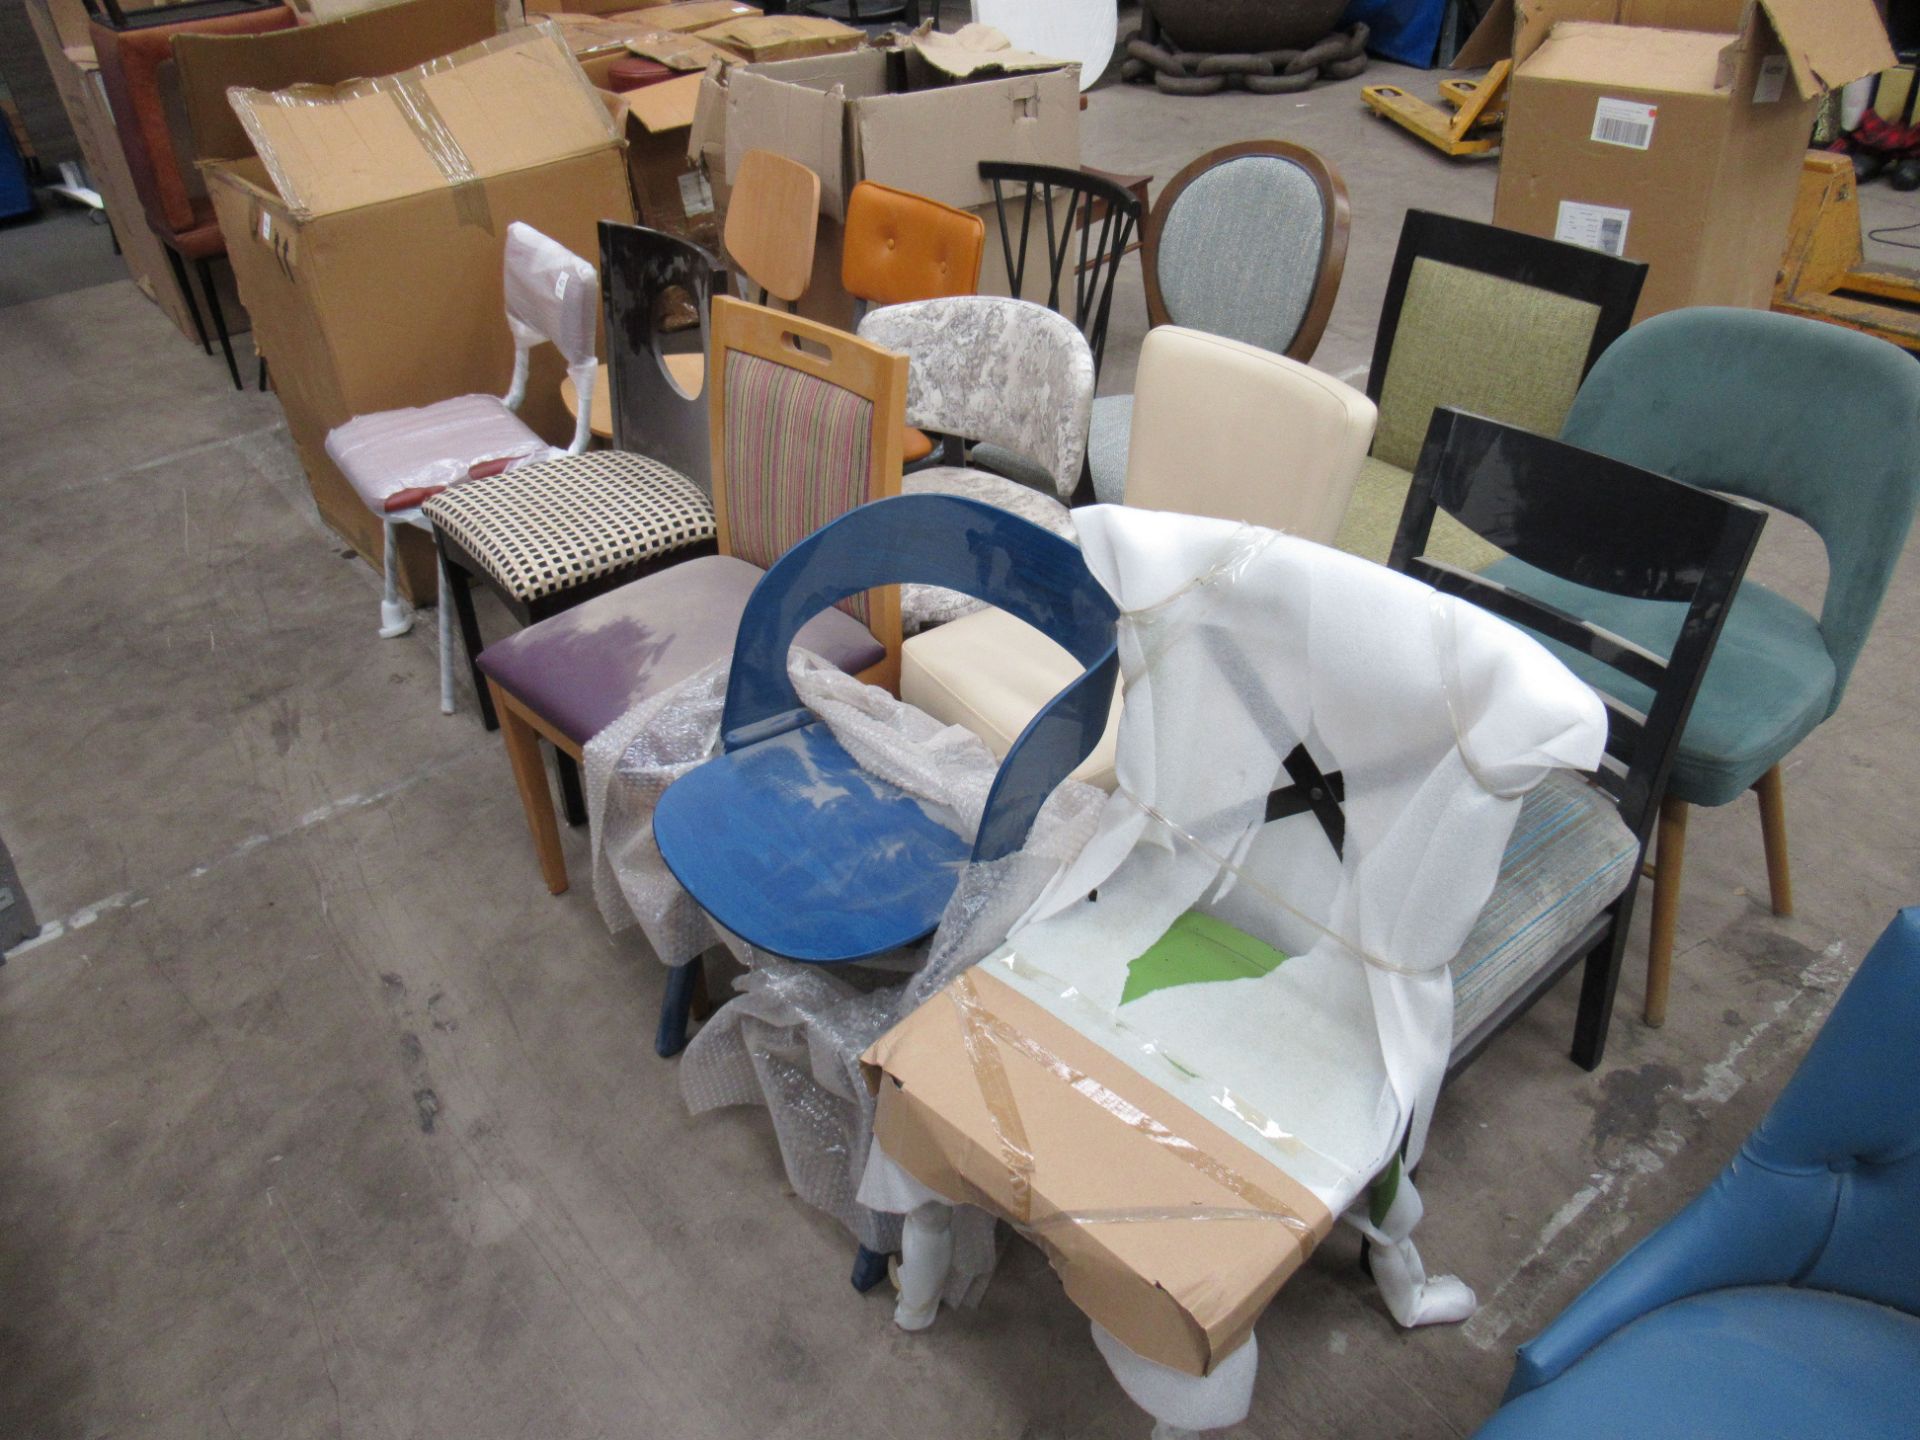 14x Various Chairs - some may need reupholstering